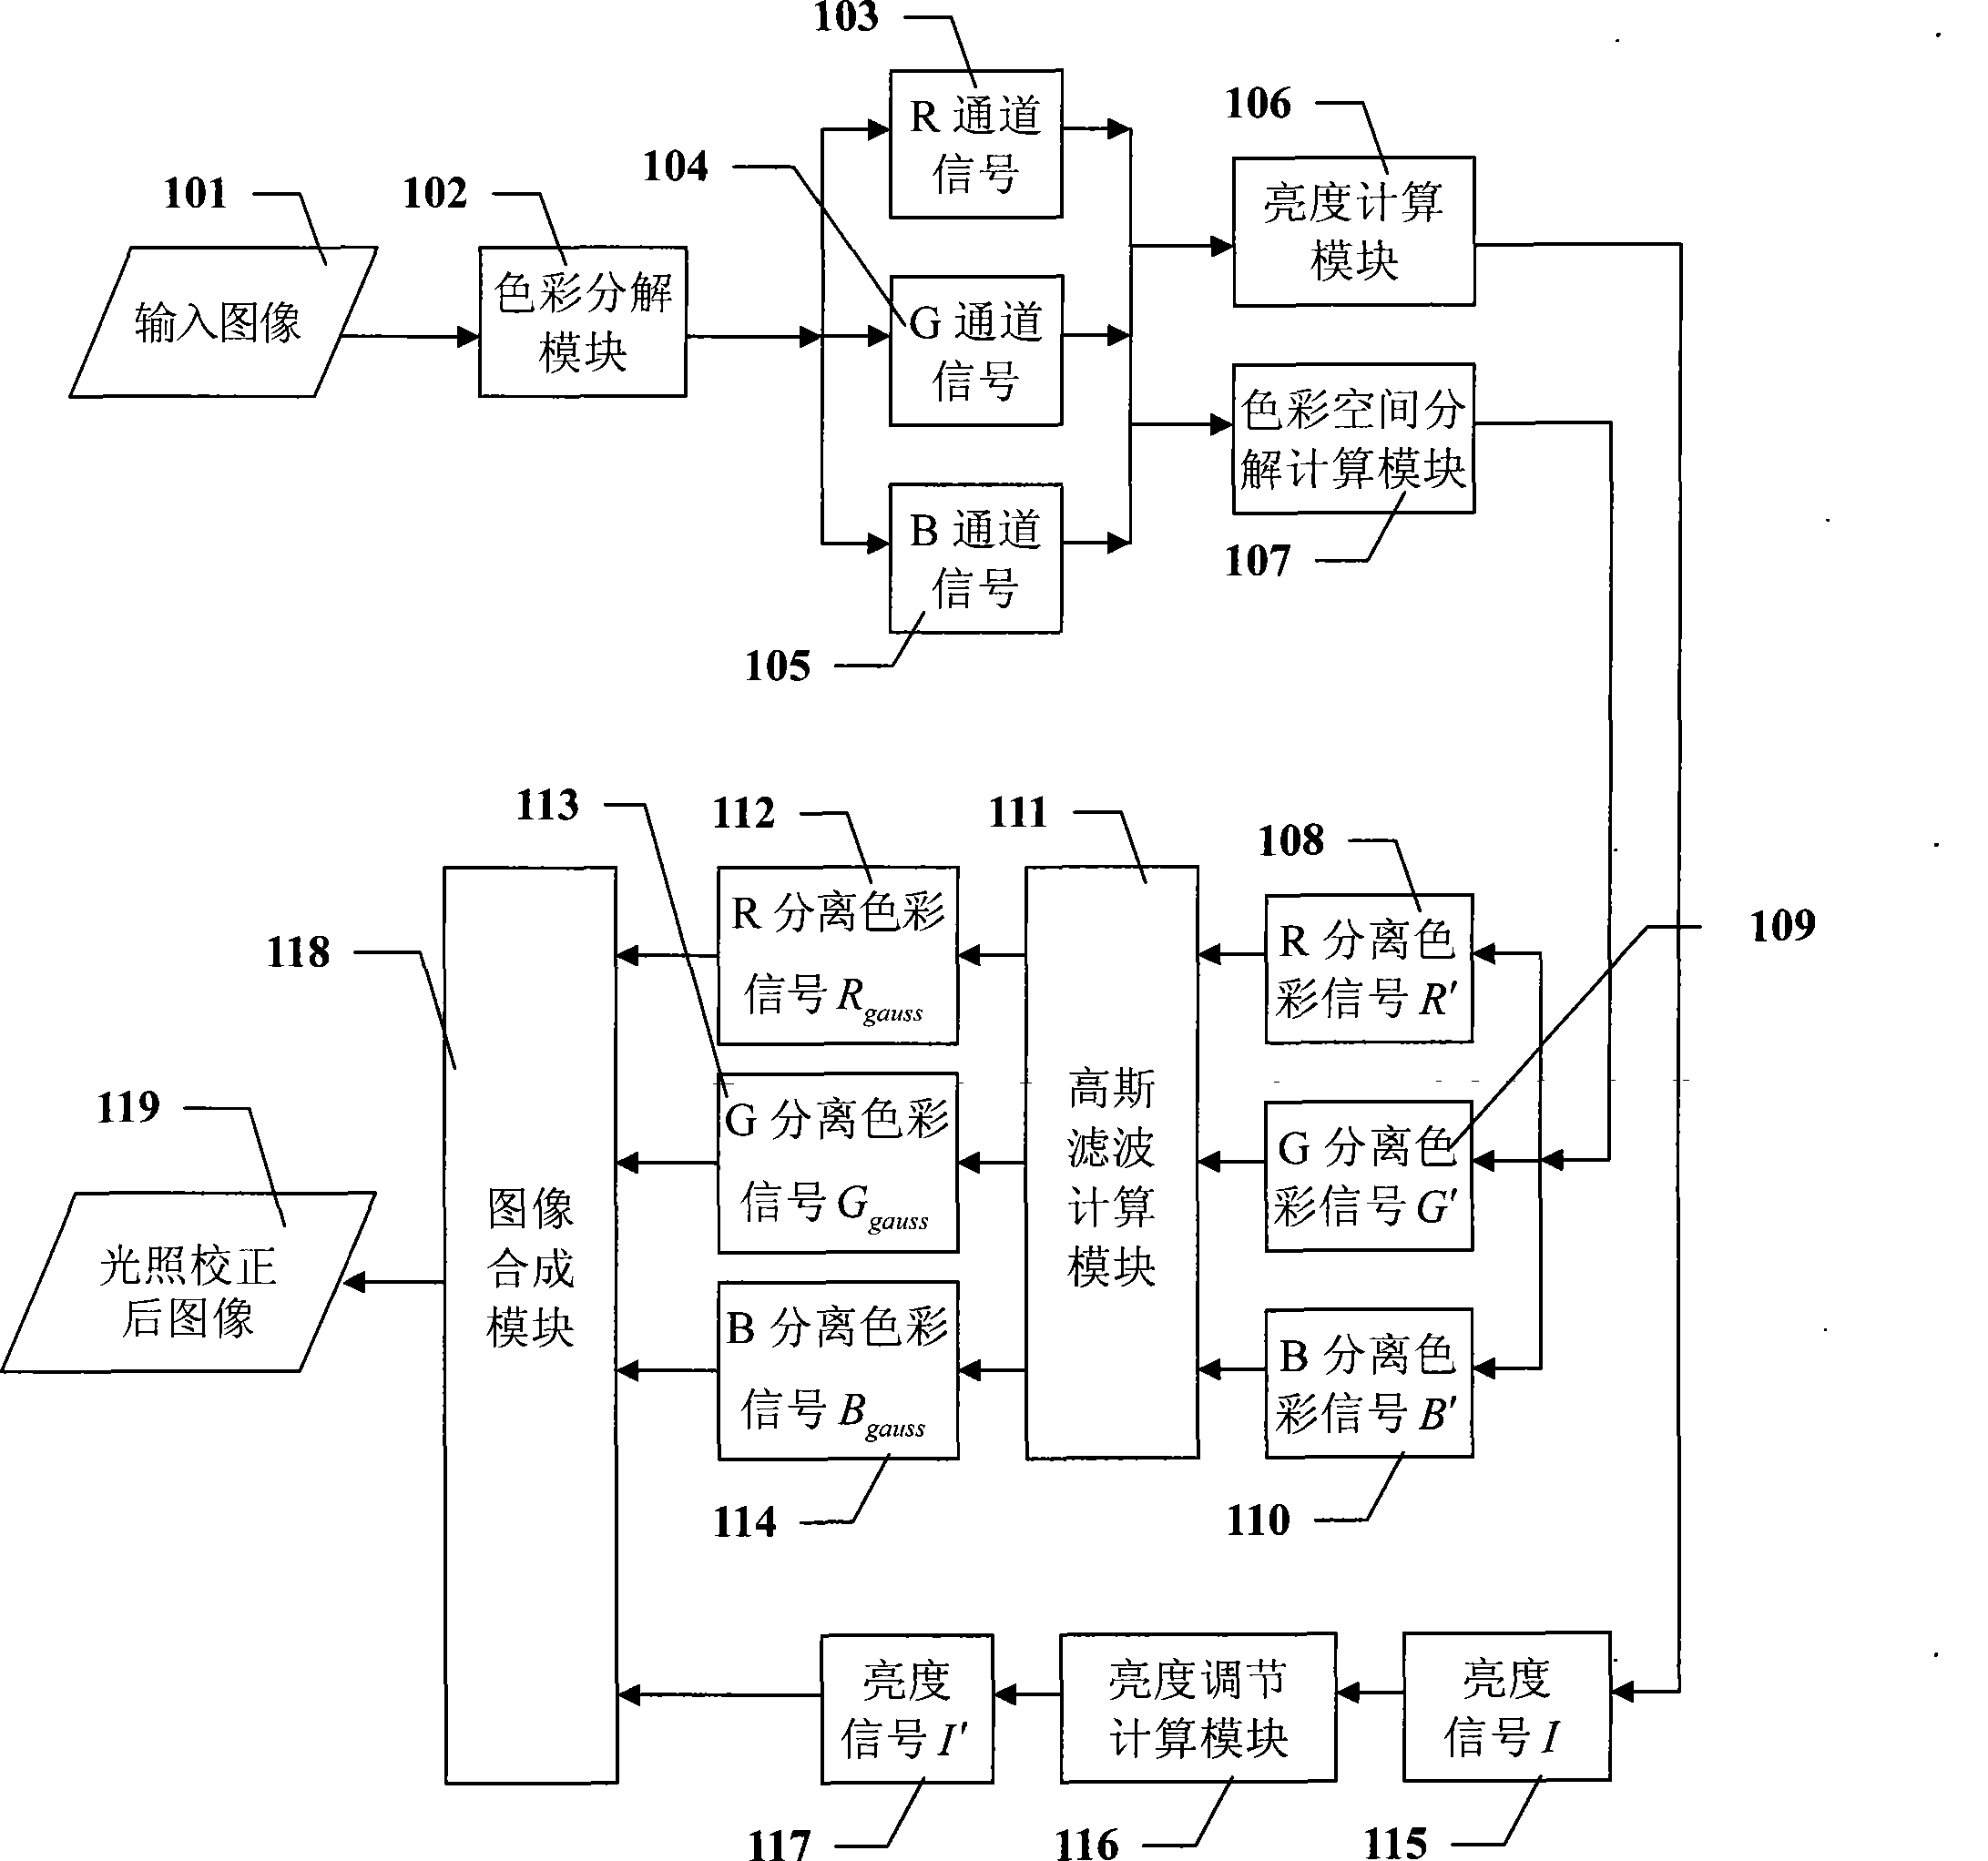 Image irradiation correcting system based on color domain mapping